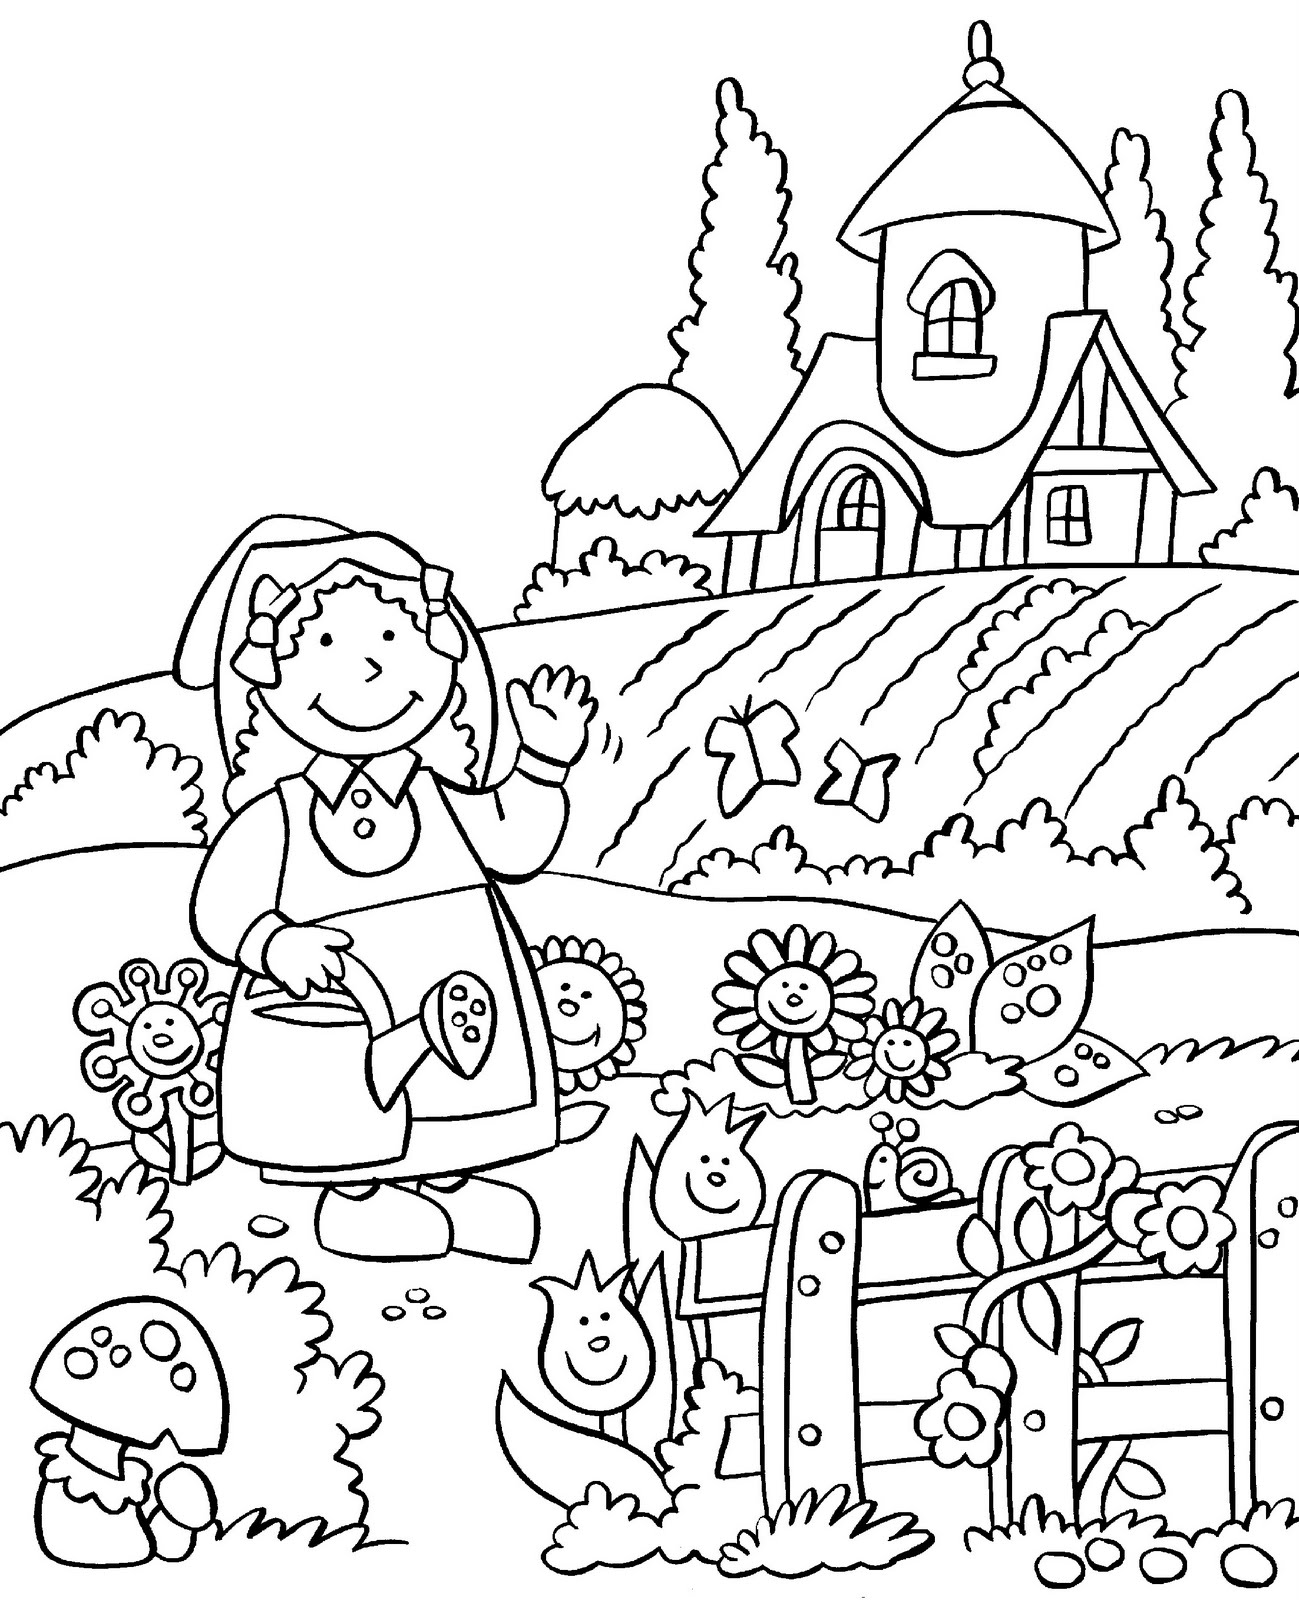 Drawings Garden Nature – Printable coloring pages